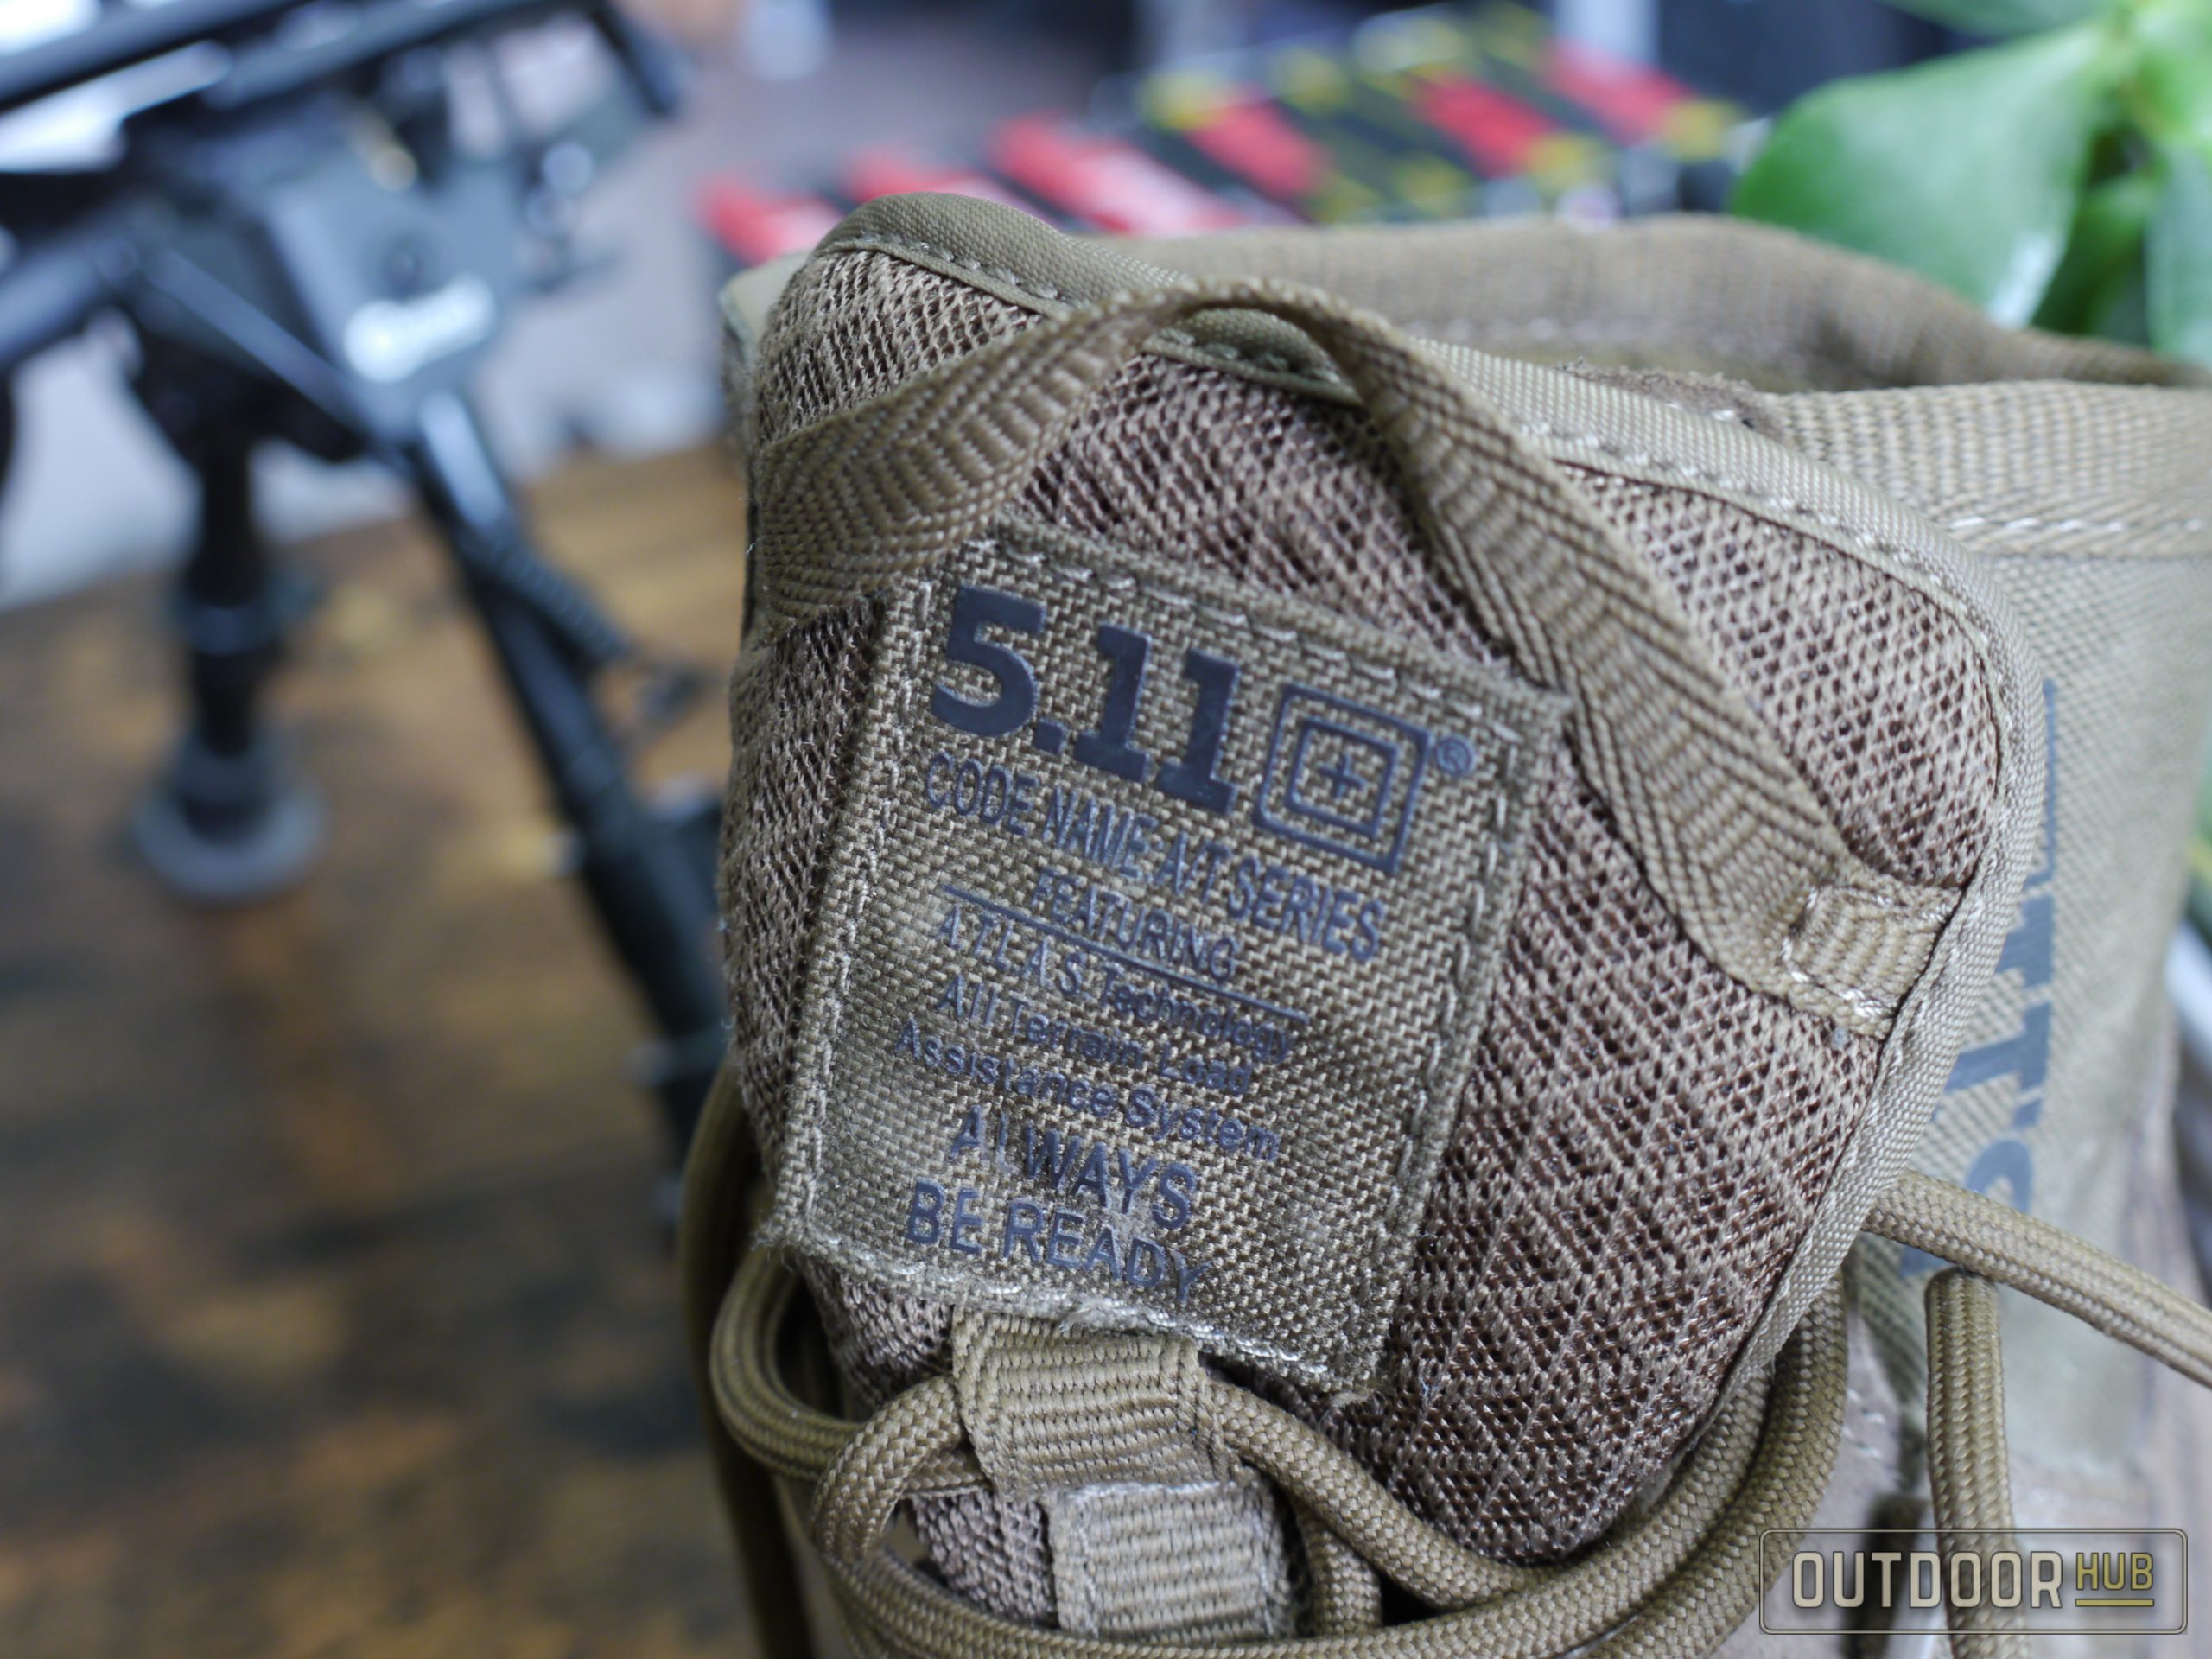 REVIEW: 5.11 A/T 6" Non-Zip Boots - Fire and Forget Boots?